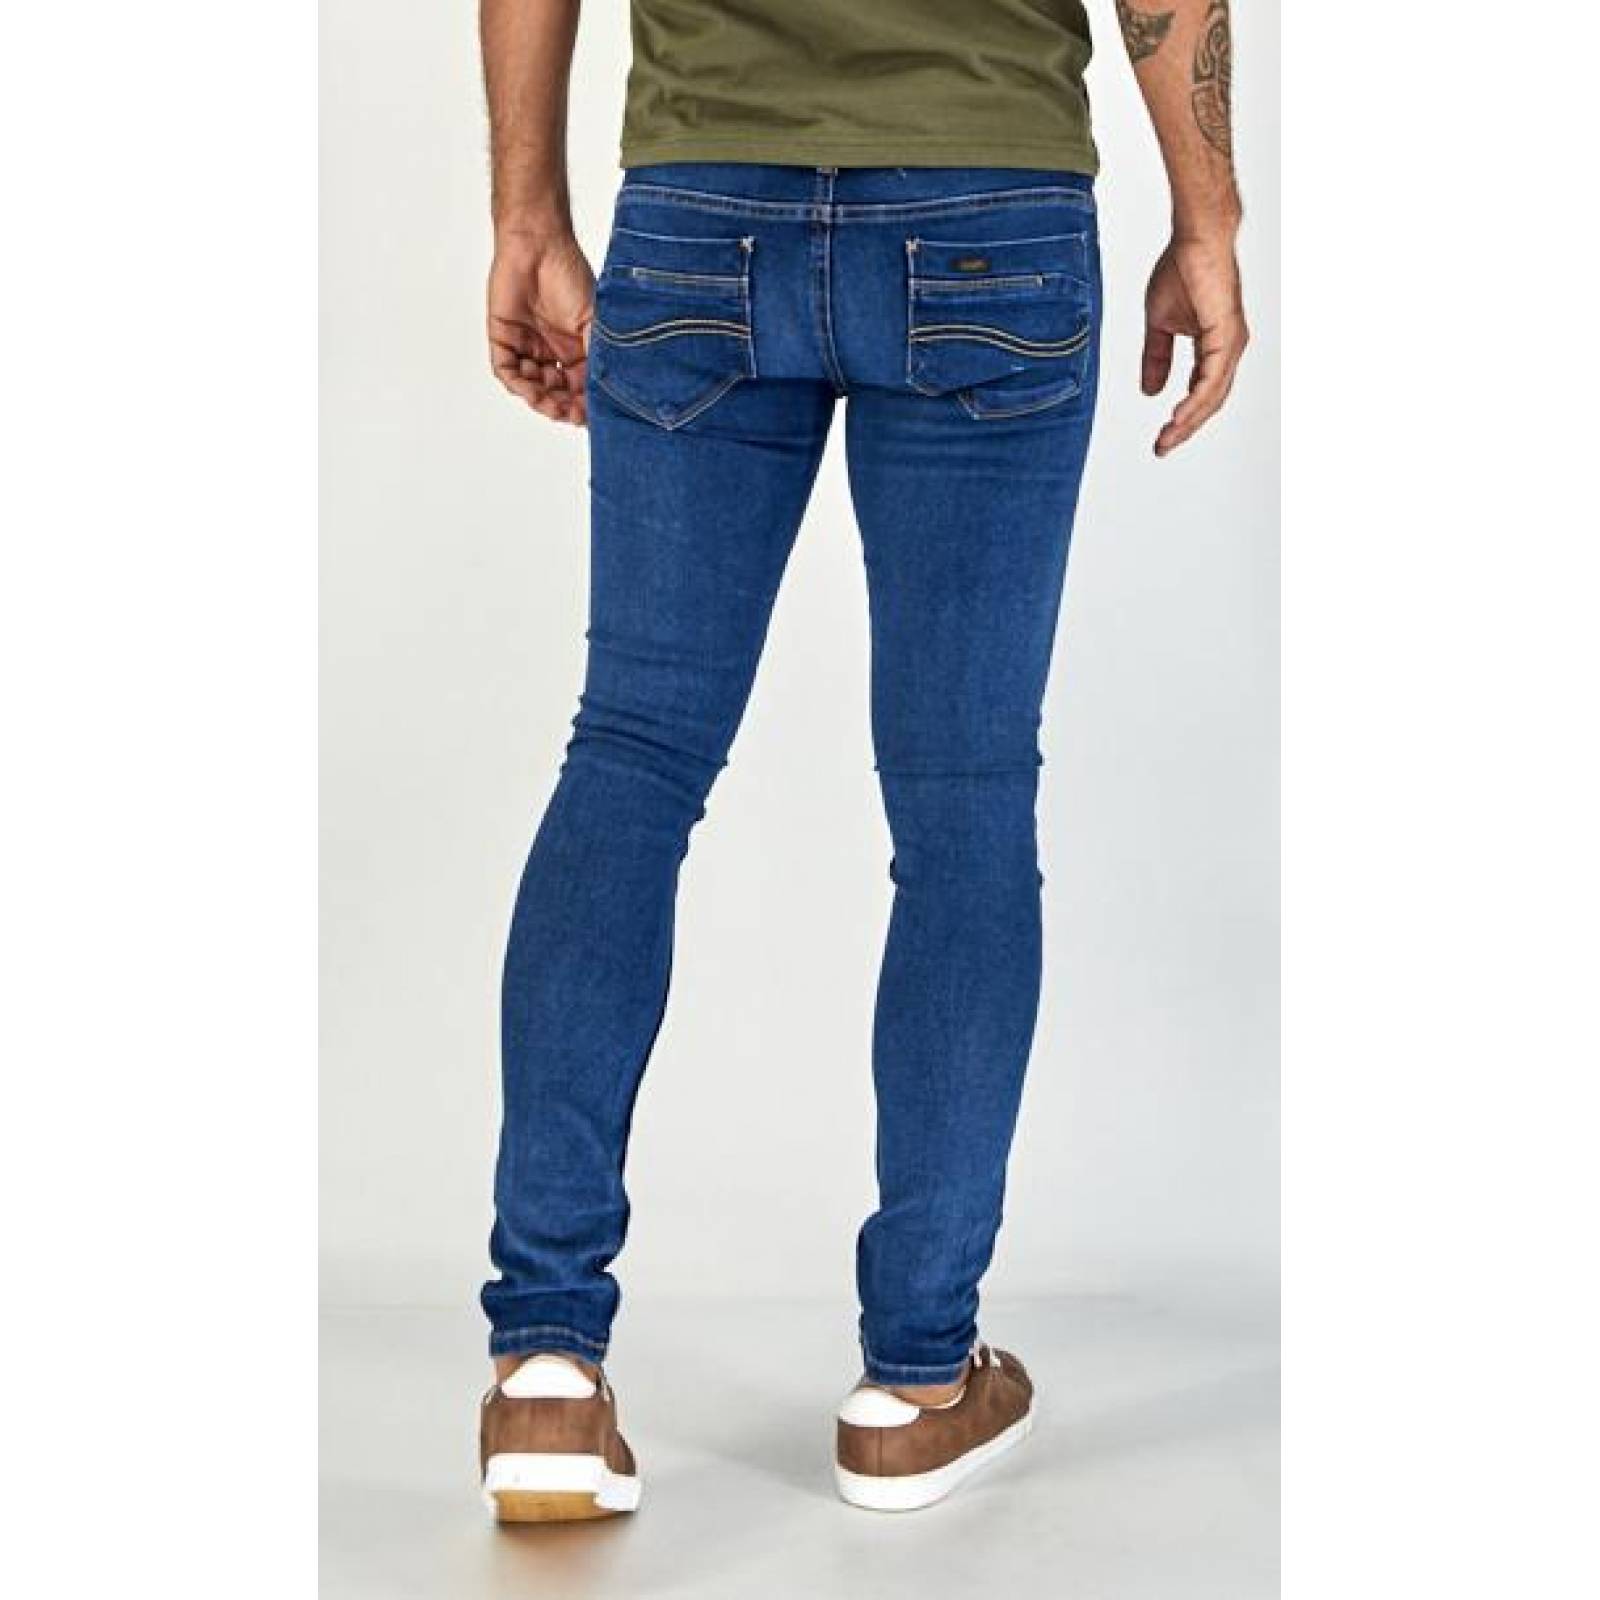 Jeans Casual Lee Hombre Super Skinny R45 - $ 447